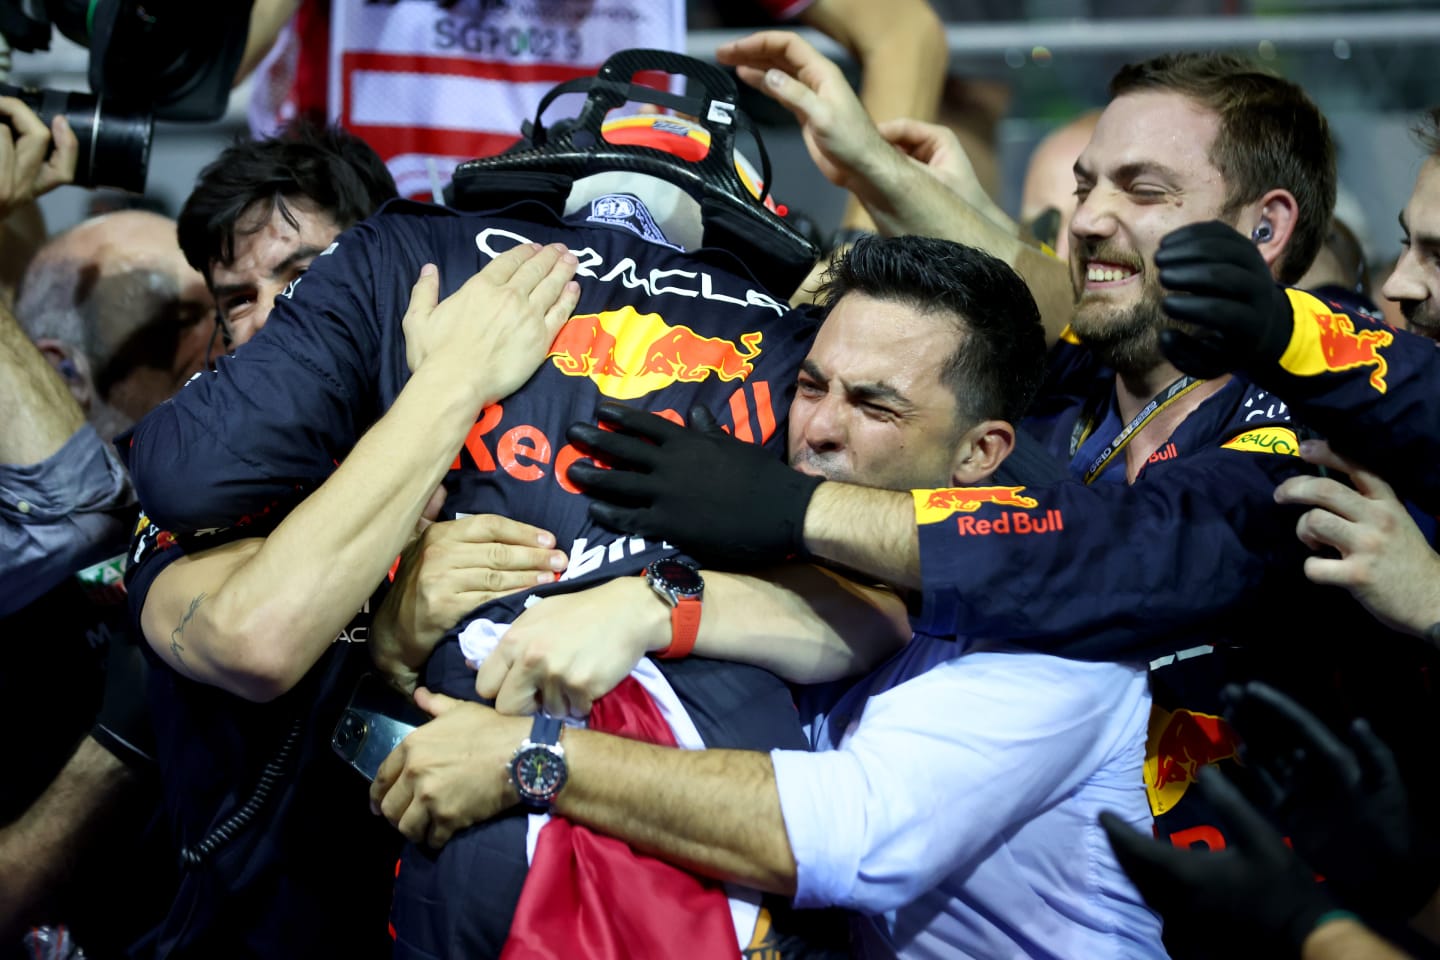 SINGAPORE, SINGAPORE - OCTOBER 02: Race winner Sergio Perez of Mexico and Oracle Red Bull Racing celebrates in parc ferme during the F1 Grand Prix of Singapore at Marina Bay Street Circuit on October 02, 2022 in Singapore, Singapore. (Photo by Dan Istitene - Formula 1/Formula 1 via Getty Images)